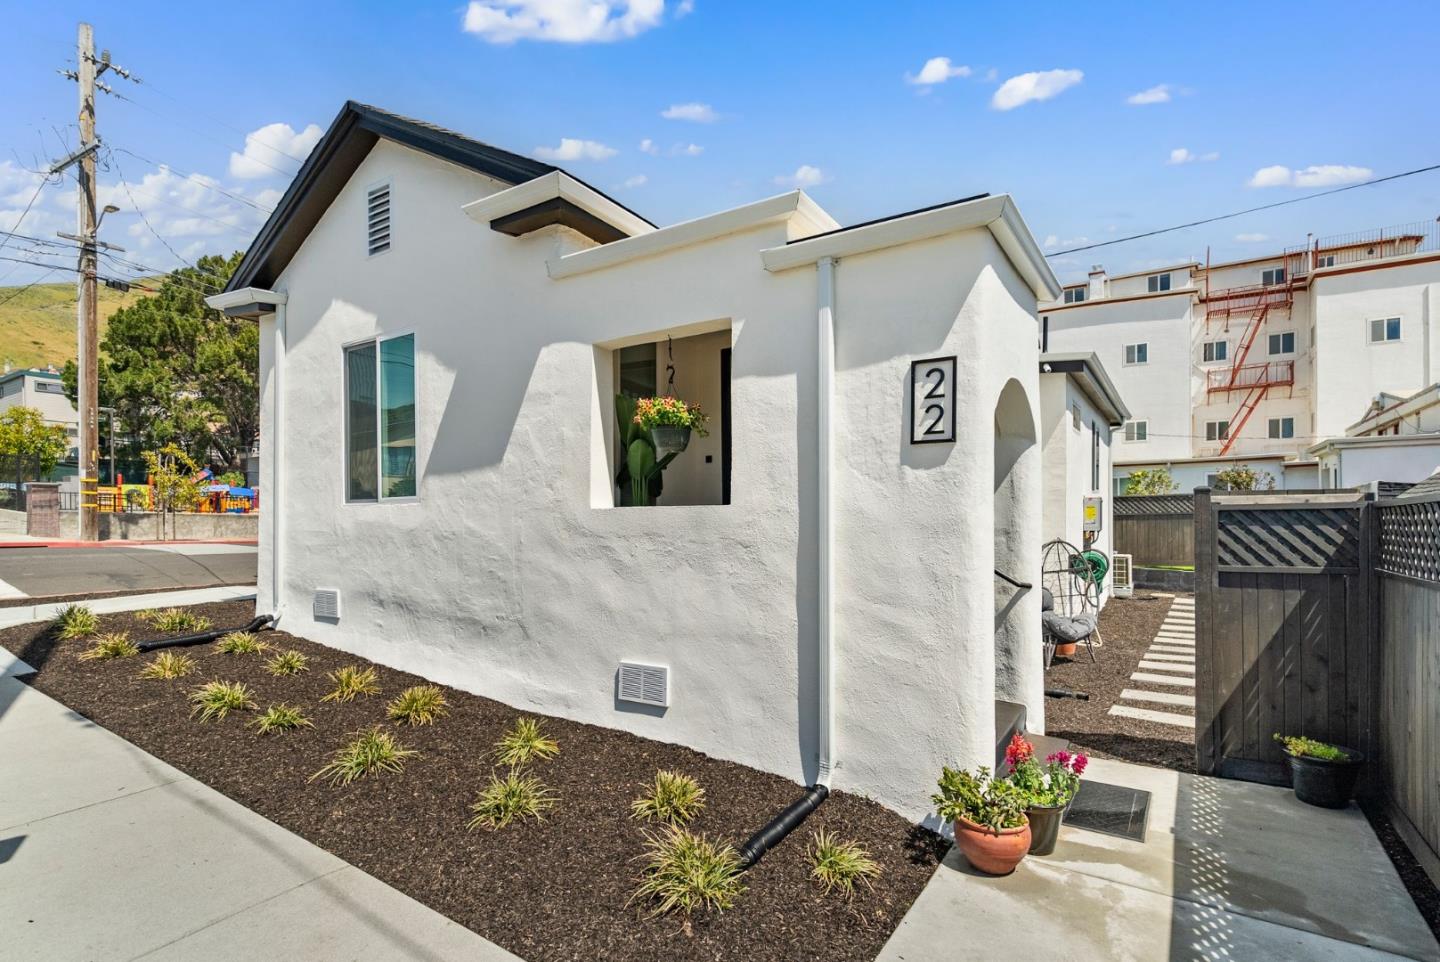 Photo of 22 Butler Ave in South San Francisco, CA